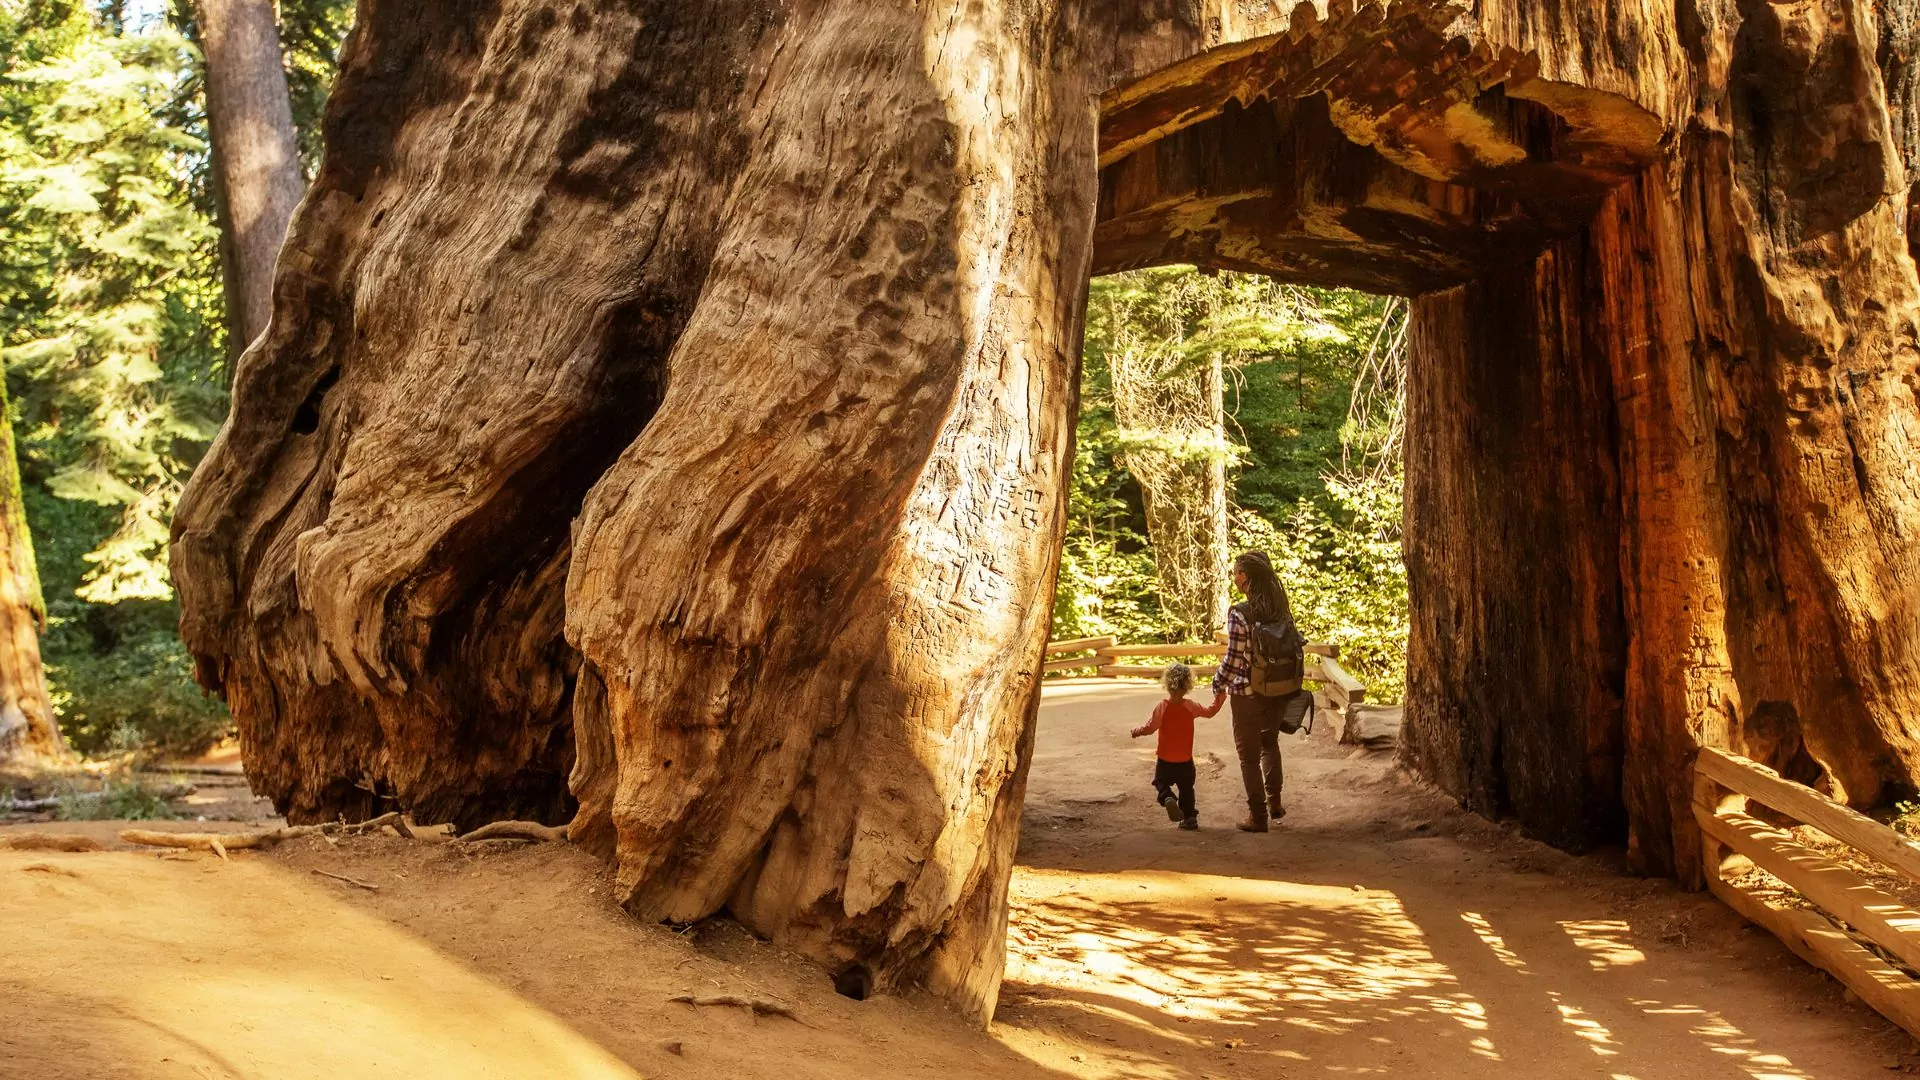 Mother and son walk through giant sequoia tree at Yosemite